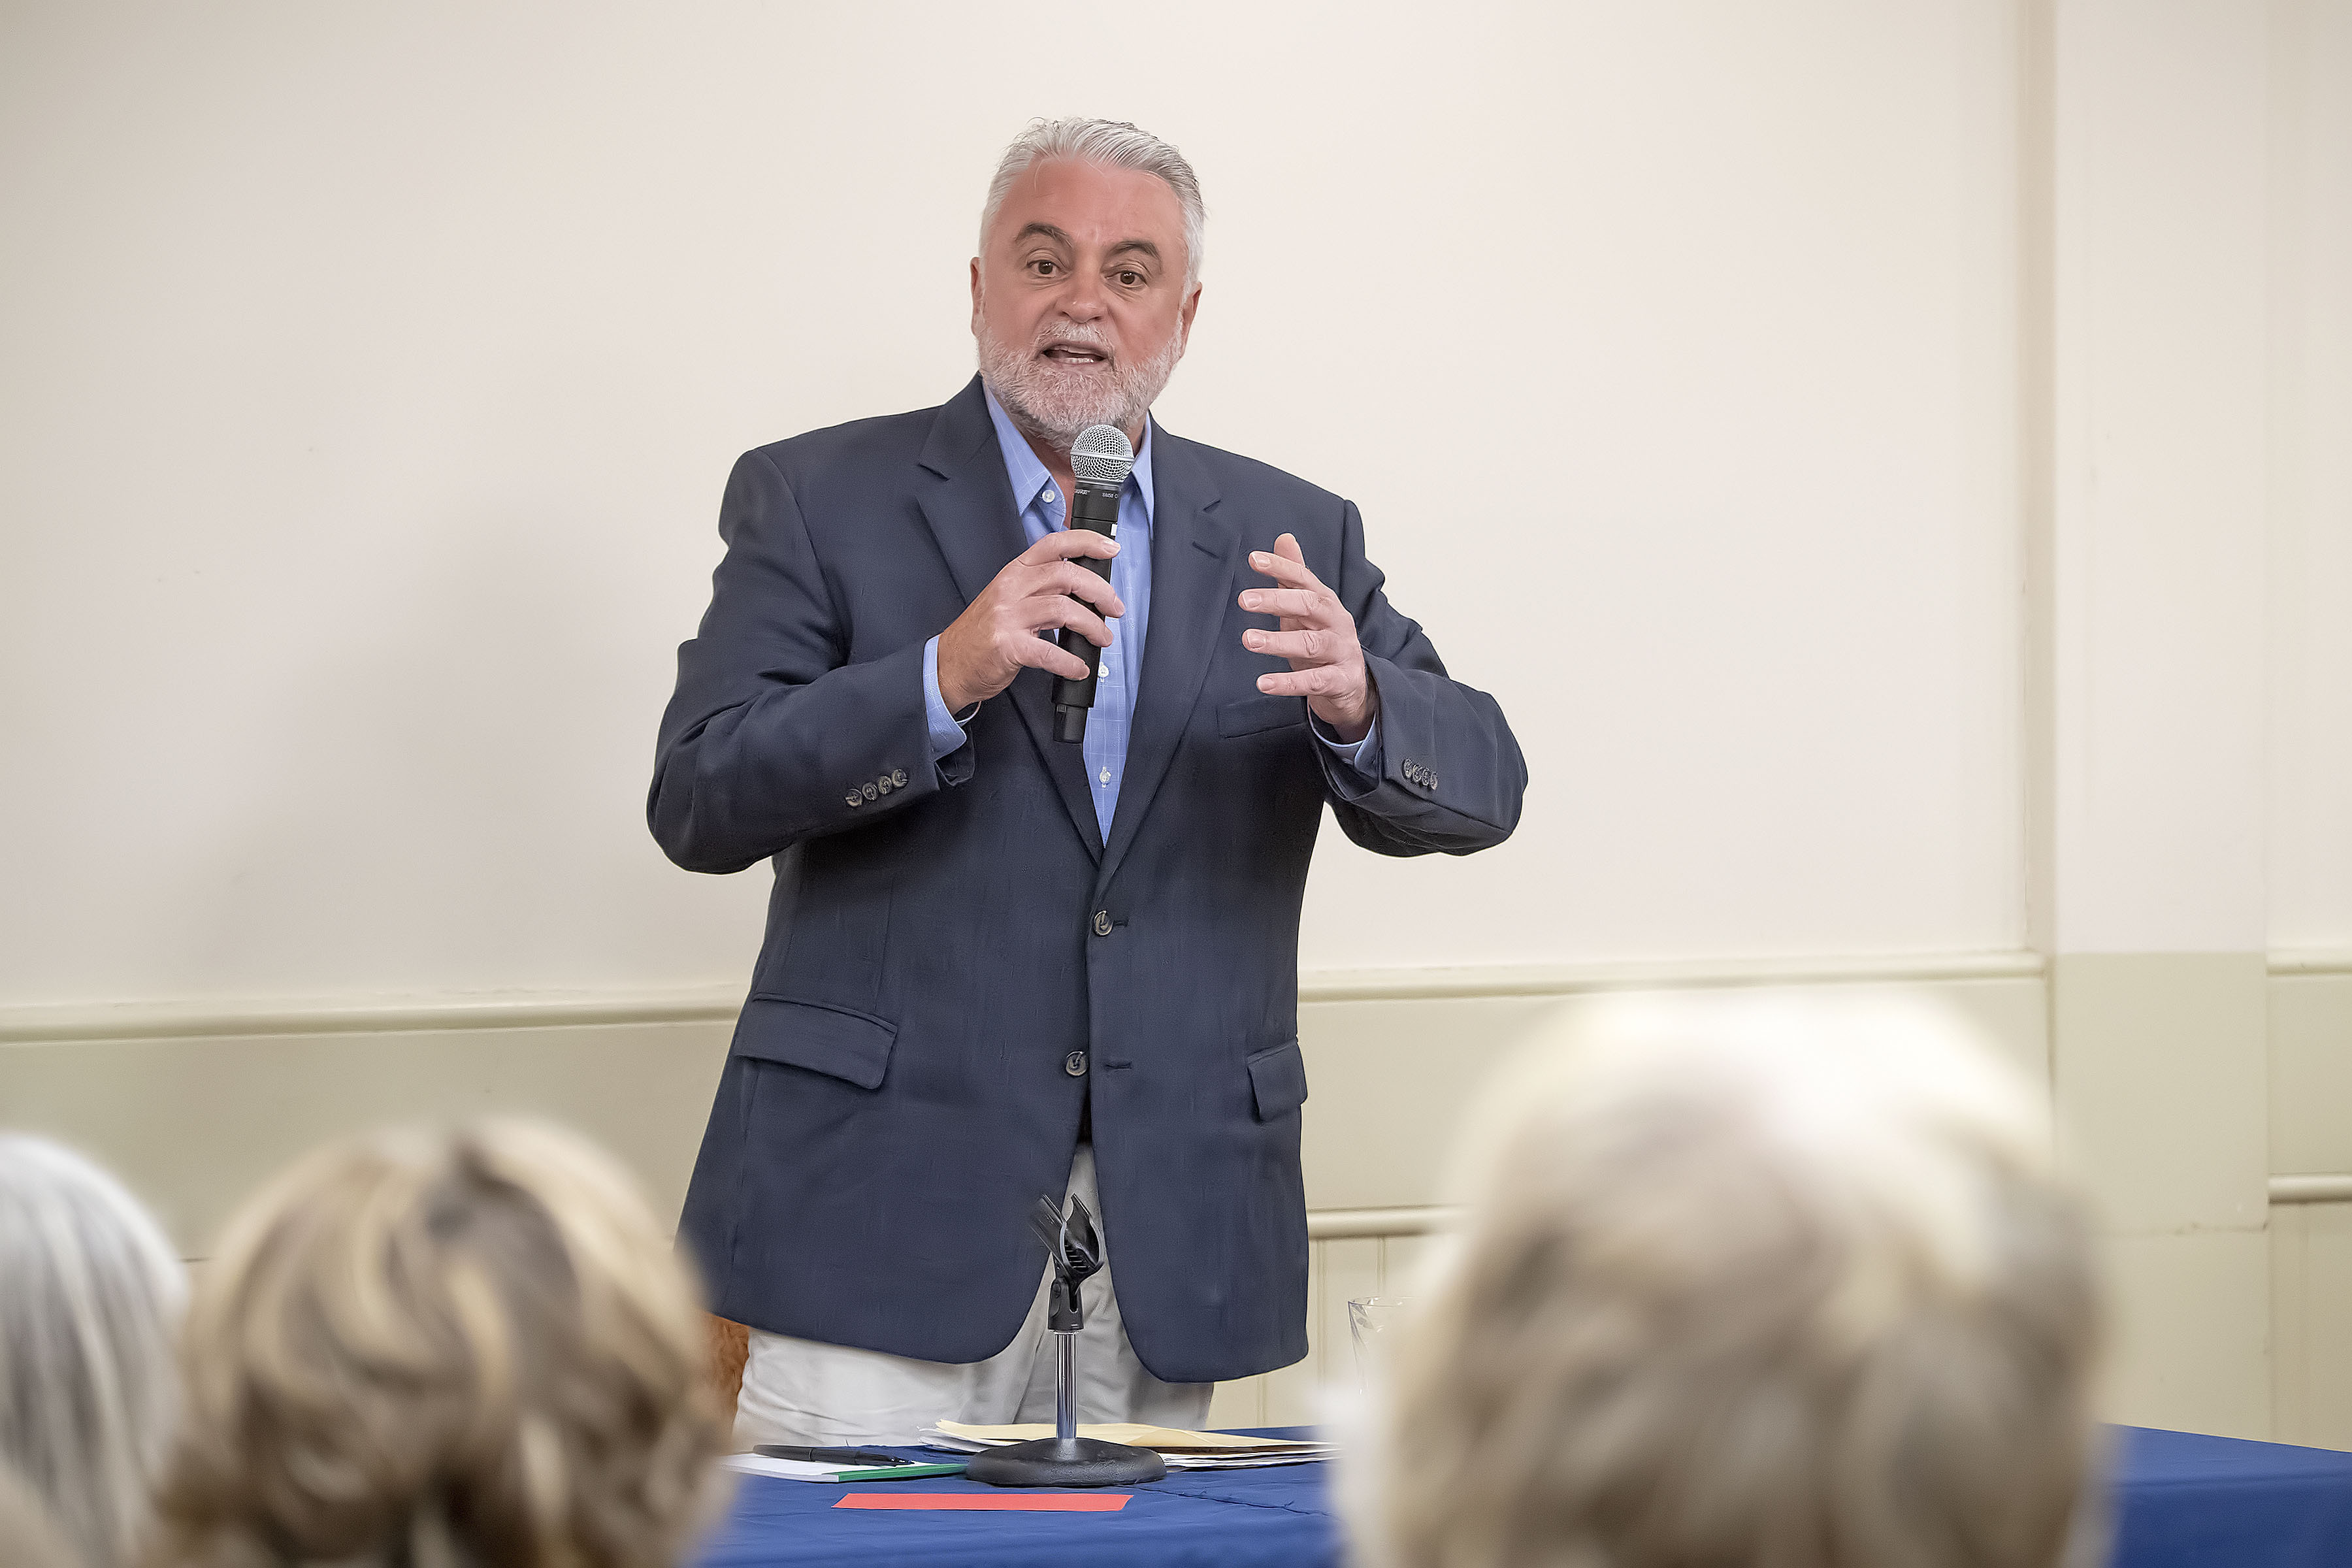 Southampton Town Supervisor Candidate Alex Gregor speaks during a Meet the Candidates Night sponsored by the League of Women Voters at the Rogers Memorial Library in Southampton on Thursday, October 17.  MICHAEL HELLER